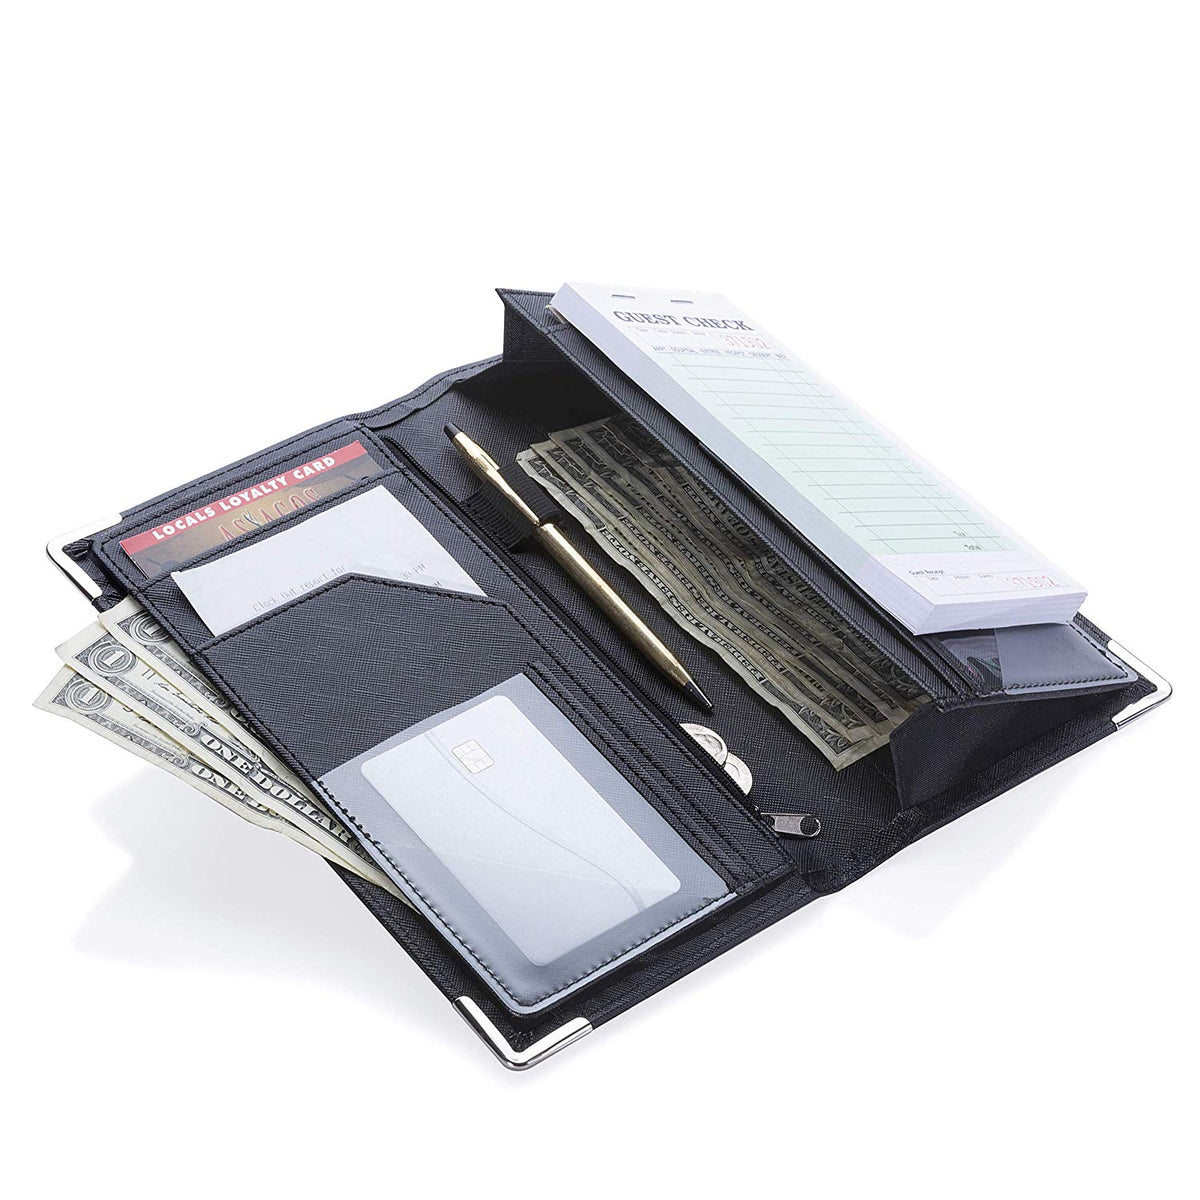 Sonic Server 5x8 Marble Server Book Organizer with Magnetic Pockets, Z